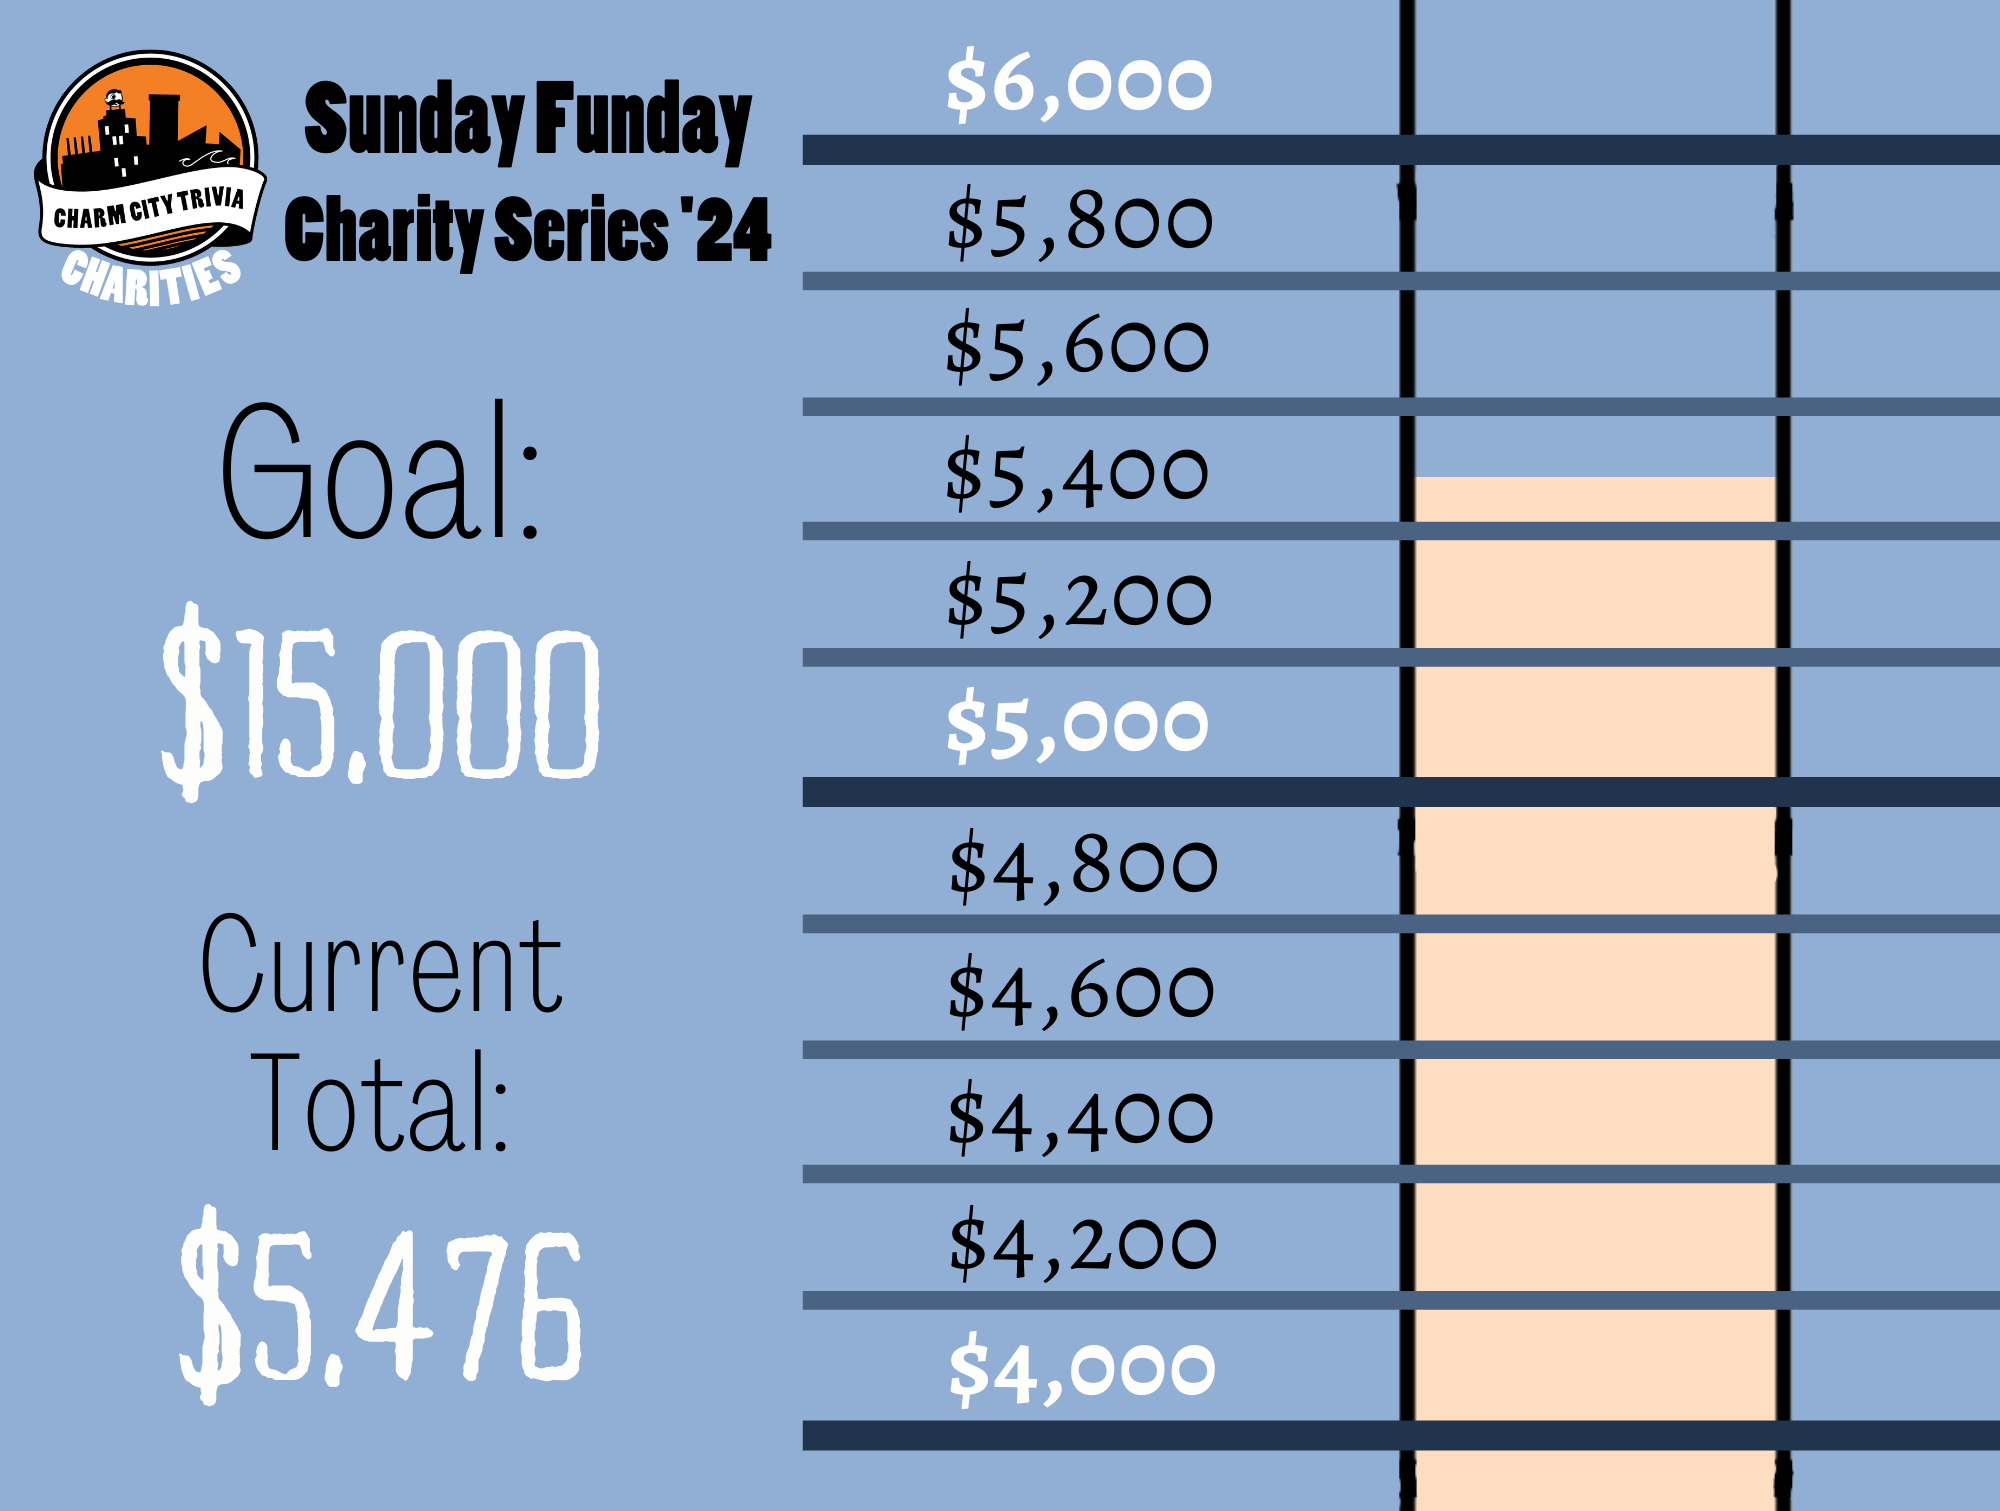 a light blue background with a section of the thermometer, blue lines separating the thermometer into donation milestones by 200s from $4,000 to $6,000, the Charm City Trivia Charities logo, a very light orange bar inside the thermometer that goes from the bottom of the image to almost halfway between the lines that reads $5,400 and $5,600, and black and white text. The text reads: Sunday Funday Charity Series '24. Goal: $15,000. Current Total: $5,476